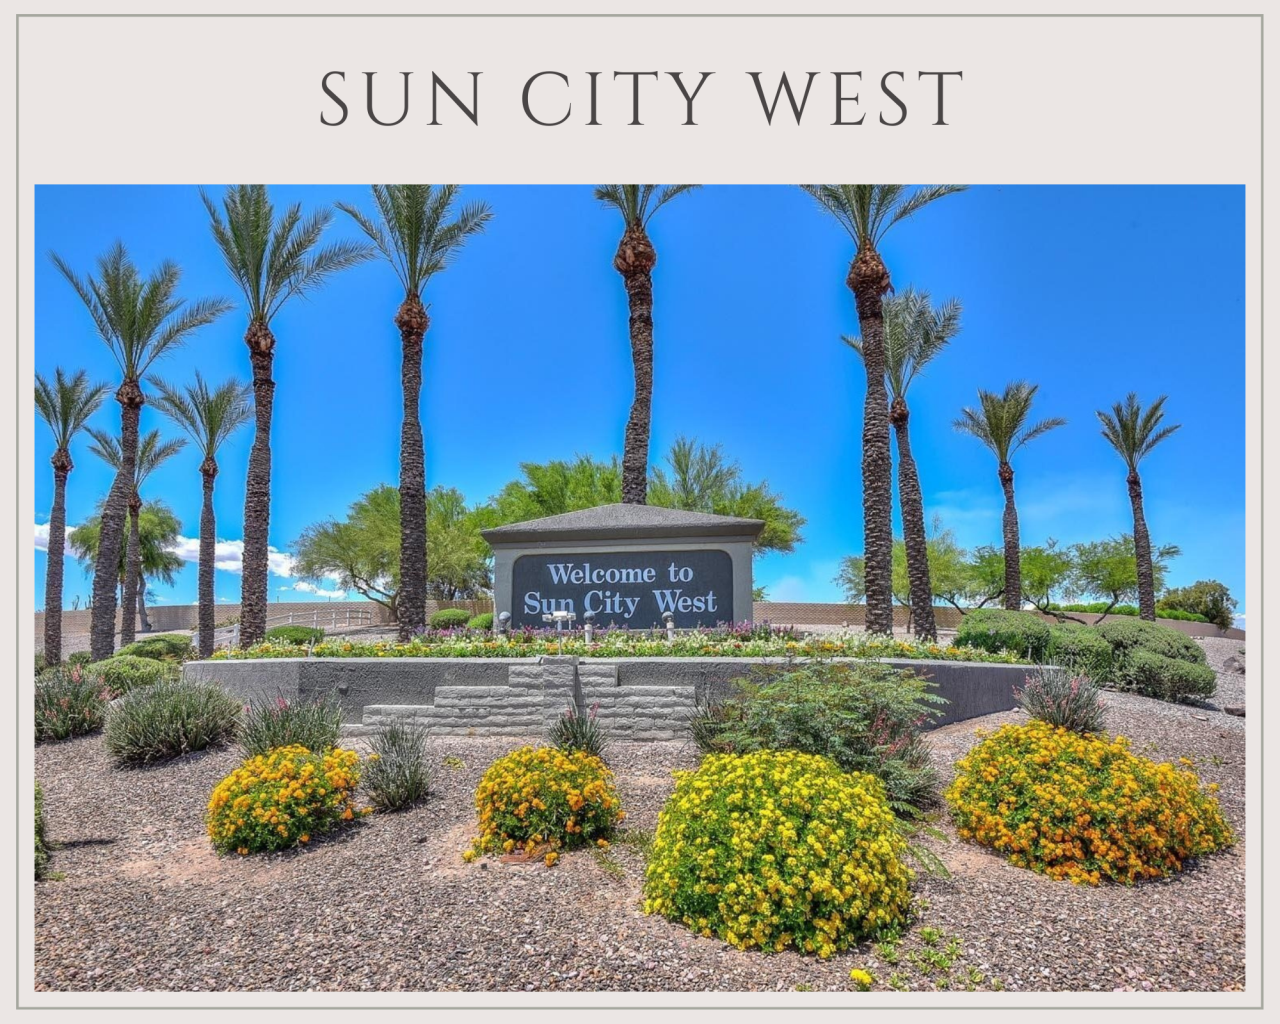 Sun City West Arizona resales real estate and homes for sale MLS listings